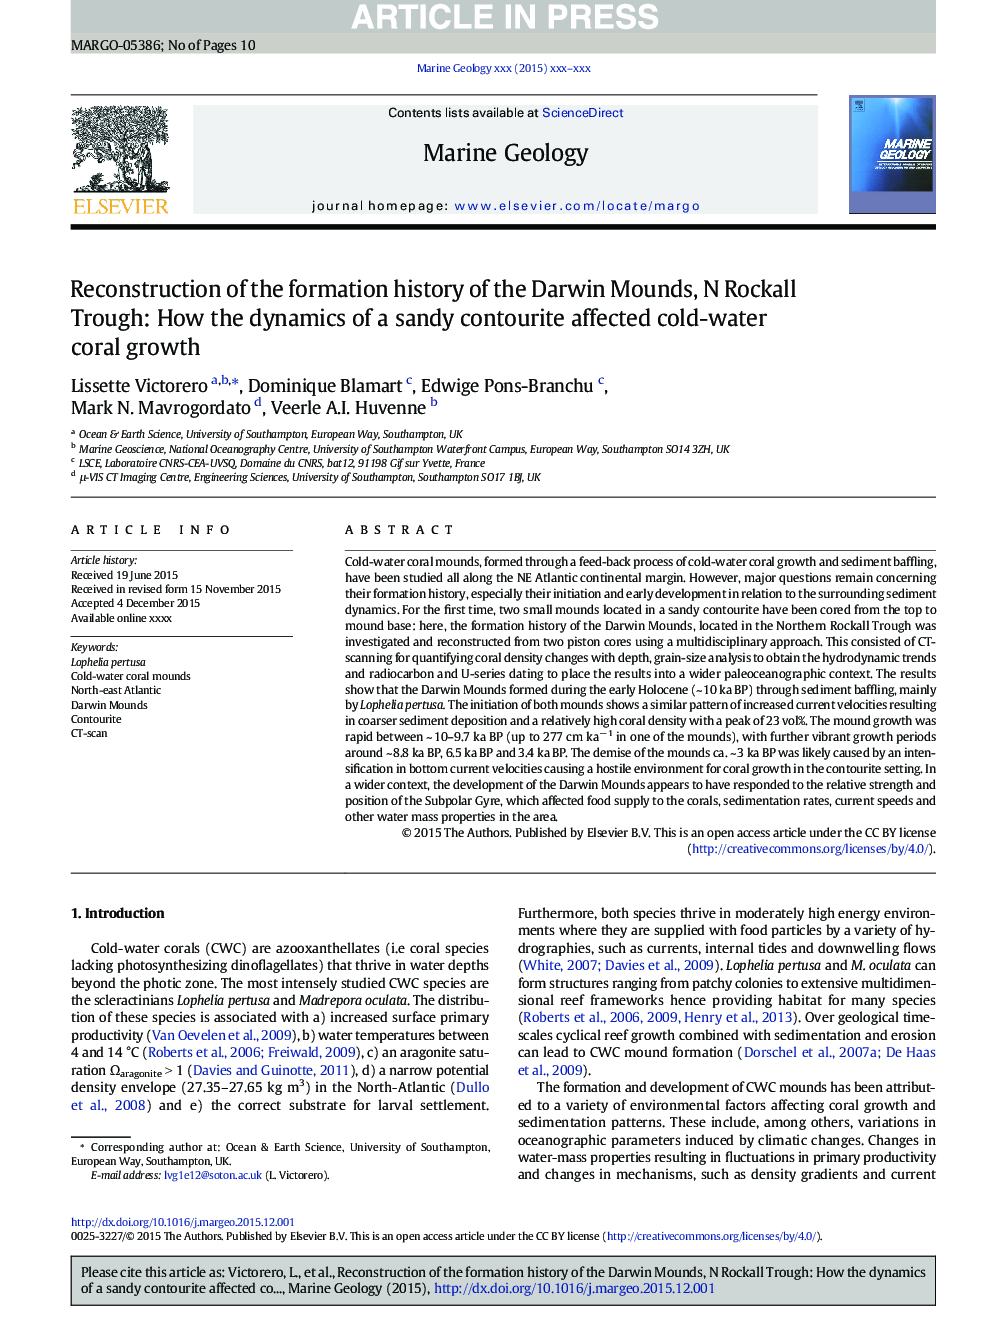 Reconstruction of the formation history of the Darwin Mounds, N Rockall Trough: How the dynamics of a sandy contourite affected cold-water coral growth